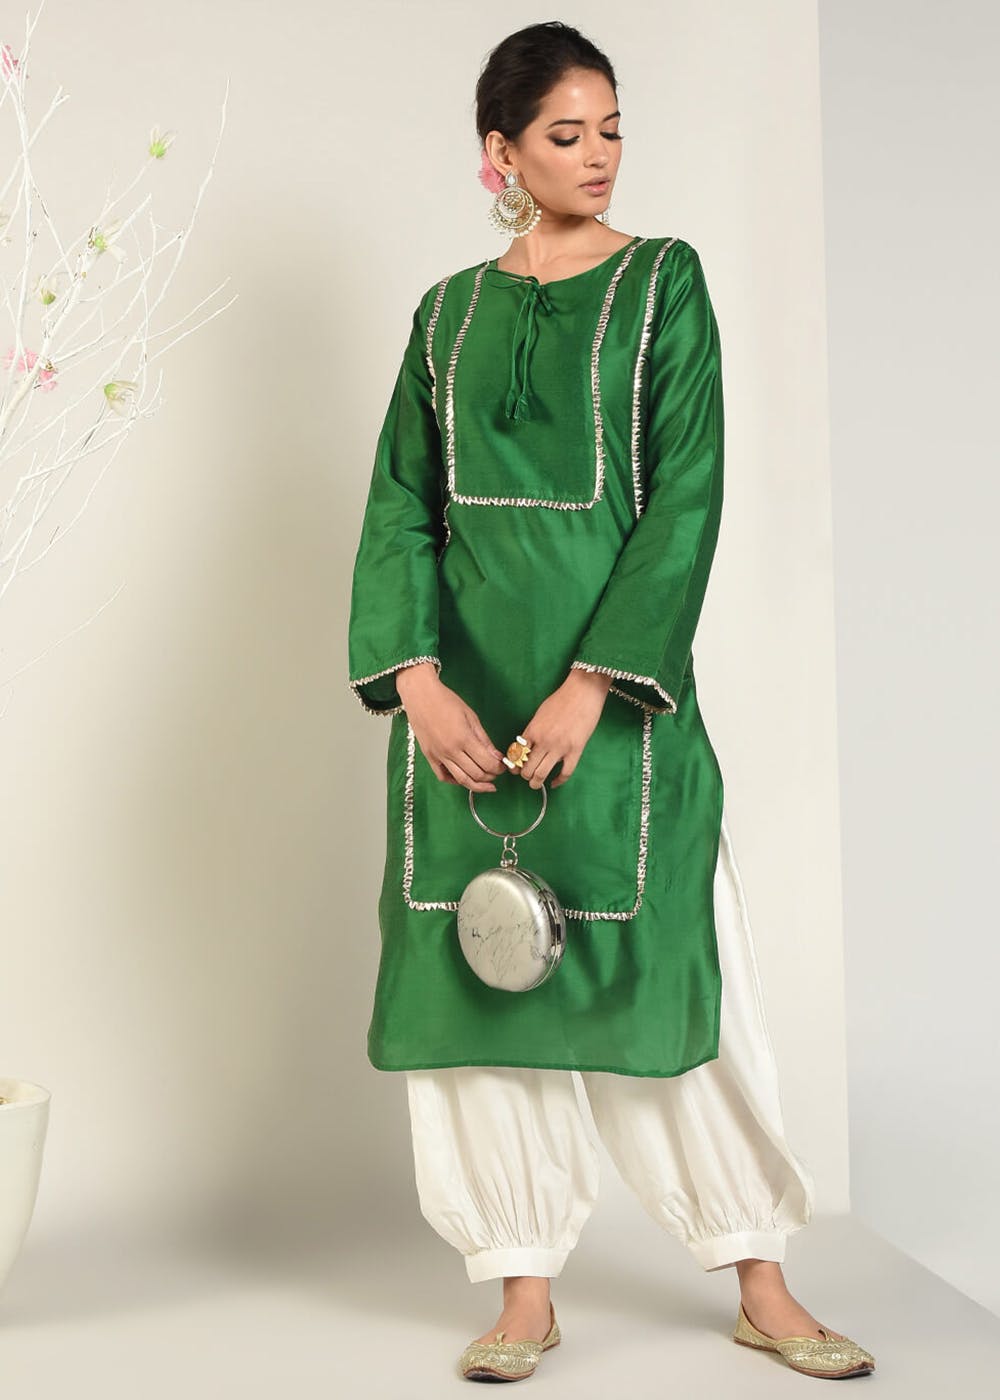 Buy Party Wear Kurti Online In India  Etsy India